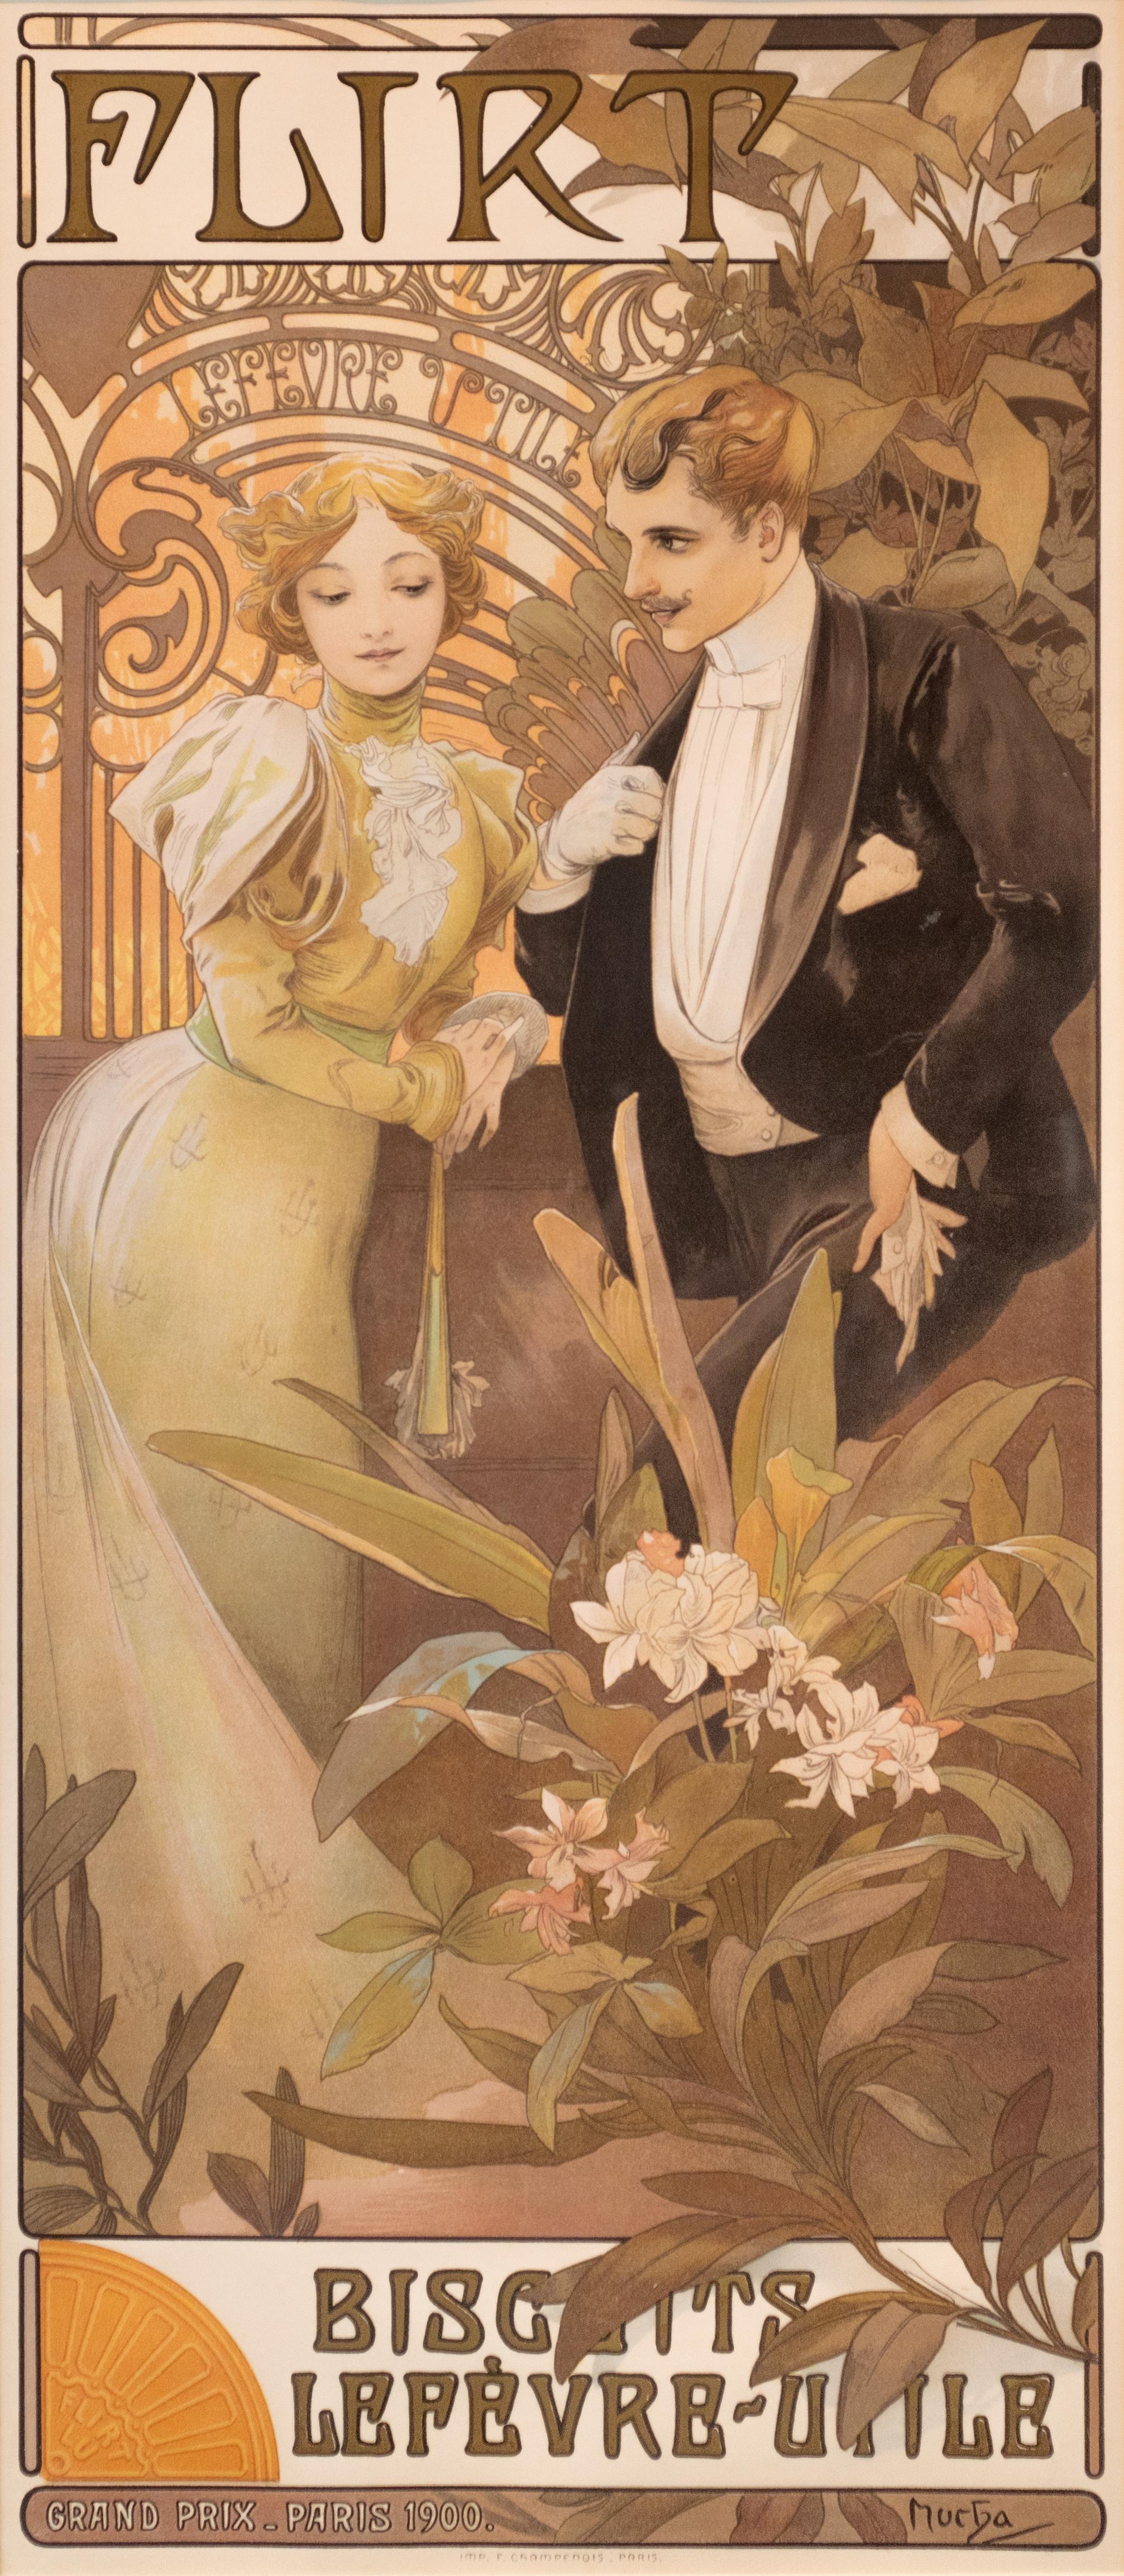 Flirt (Biscuits Lefevre-Utile) Lithograph Poster - Art by Alphonse Mucha